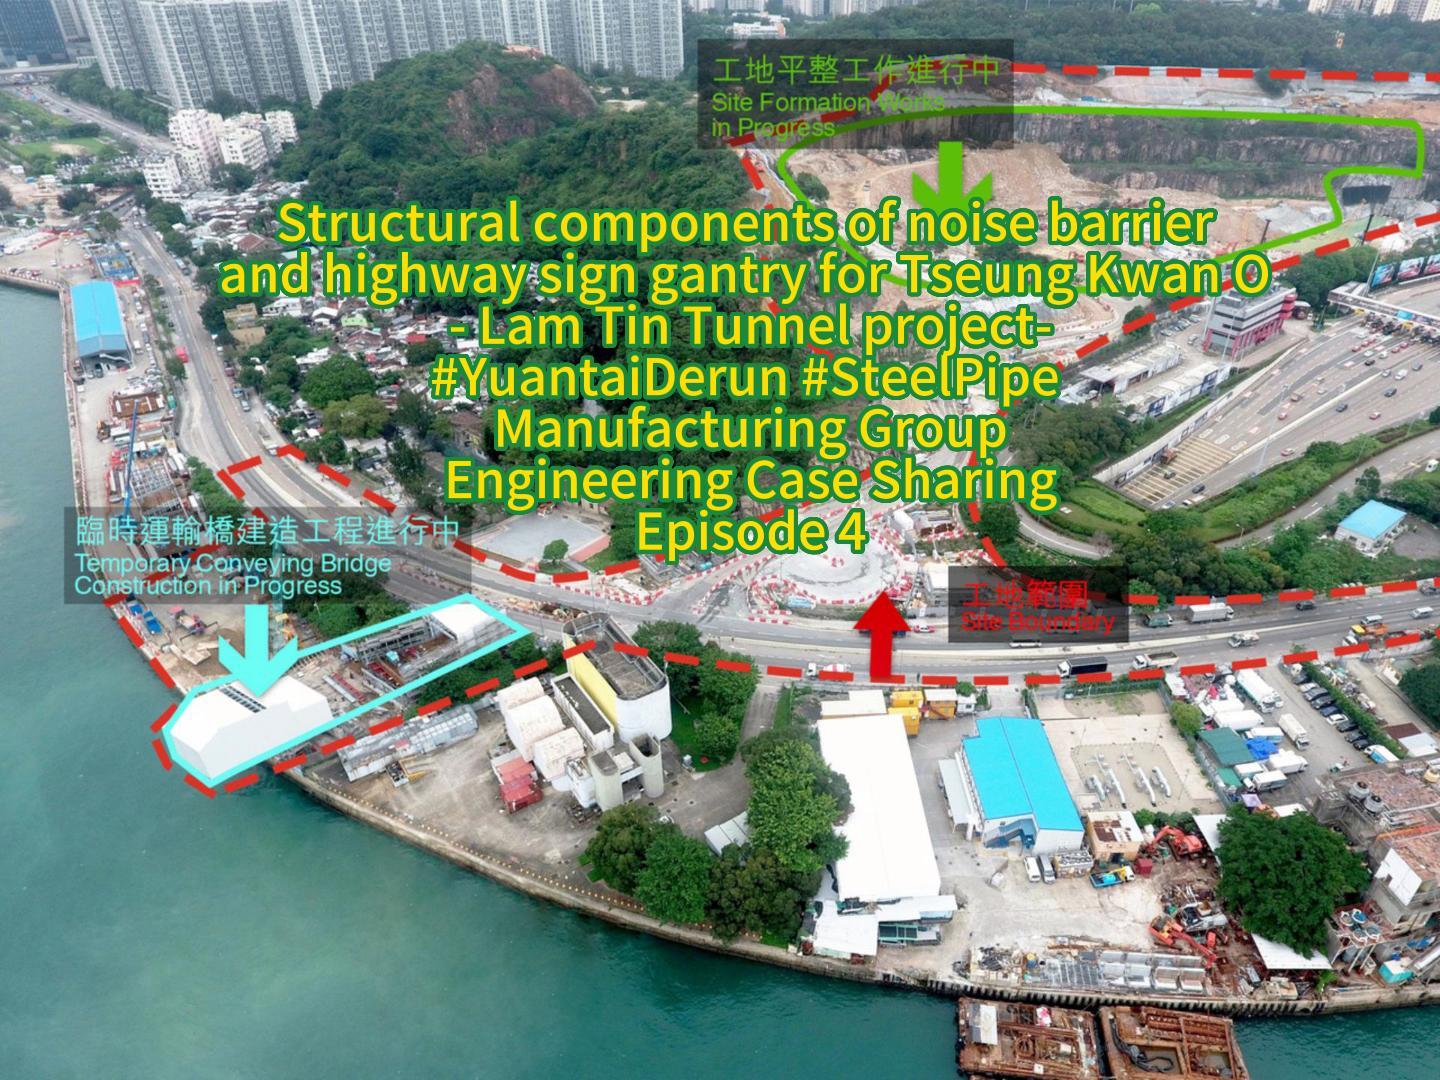 Structural components of noise barrier and highway sign gantry for Tseung Kwan O - Lam Tin Tunnel project